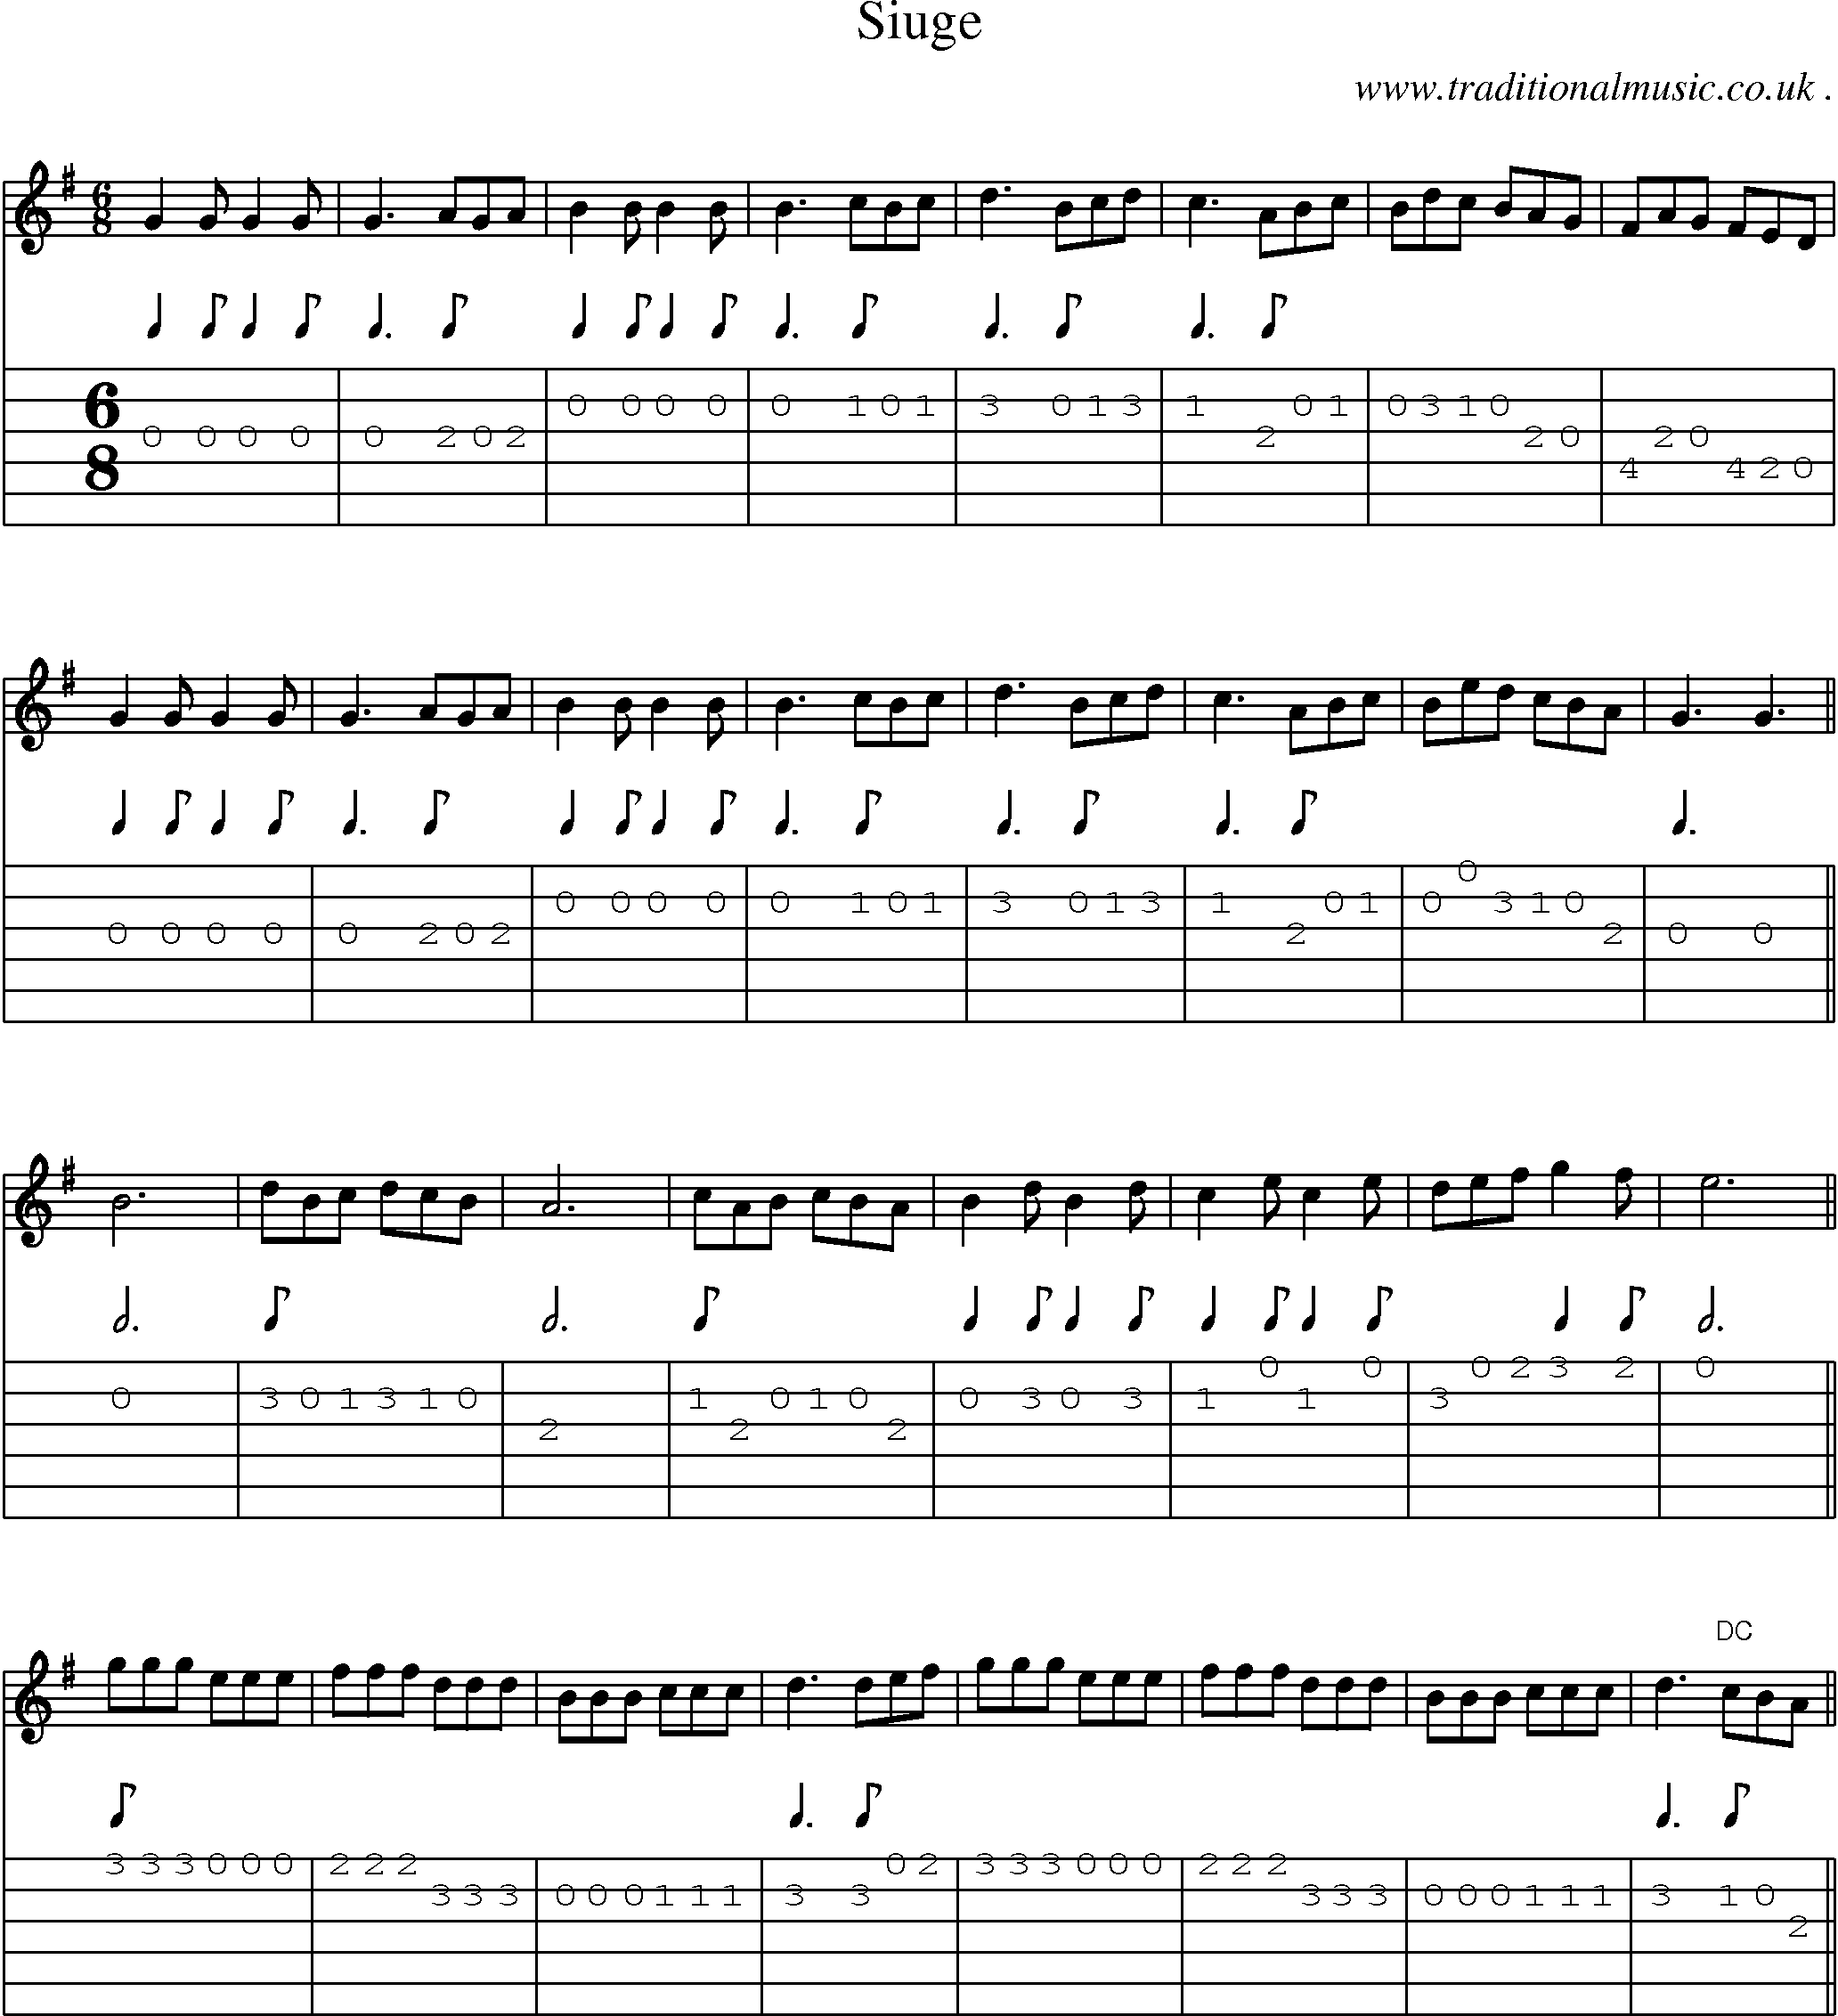 Sheet-Music and Guitar Tabs for Siuge